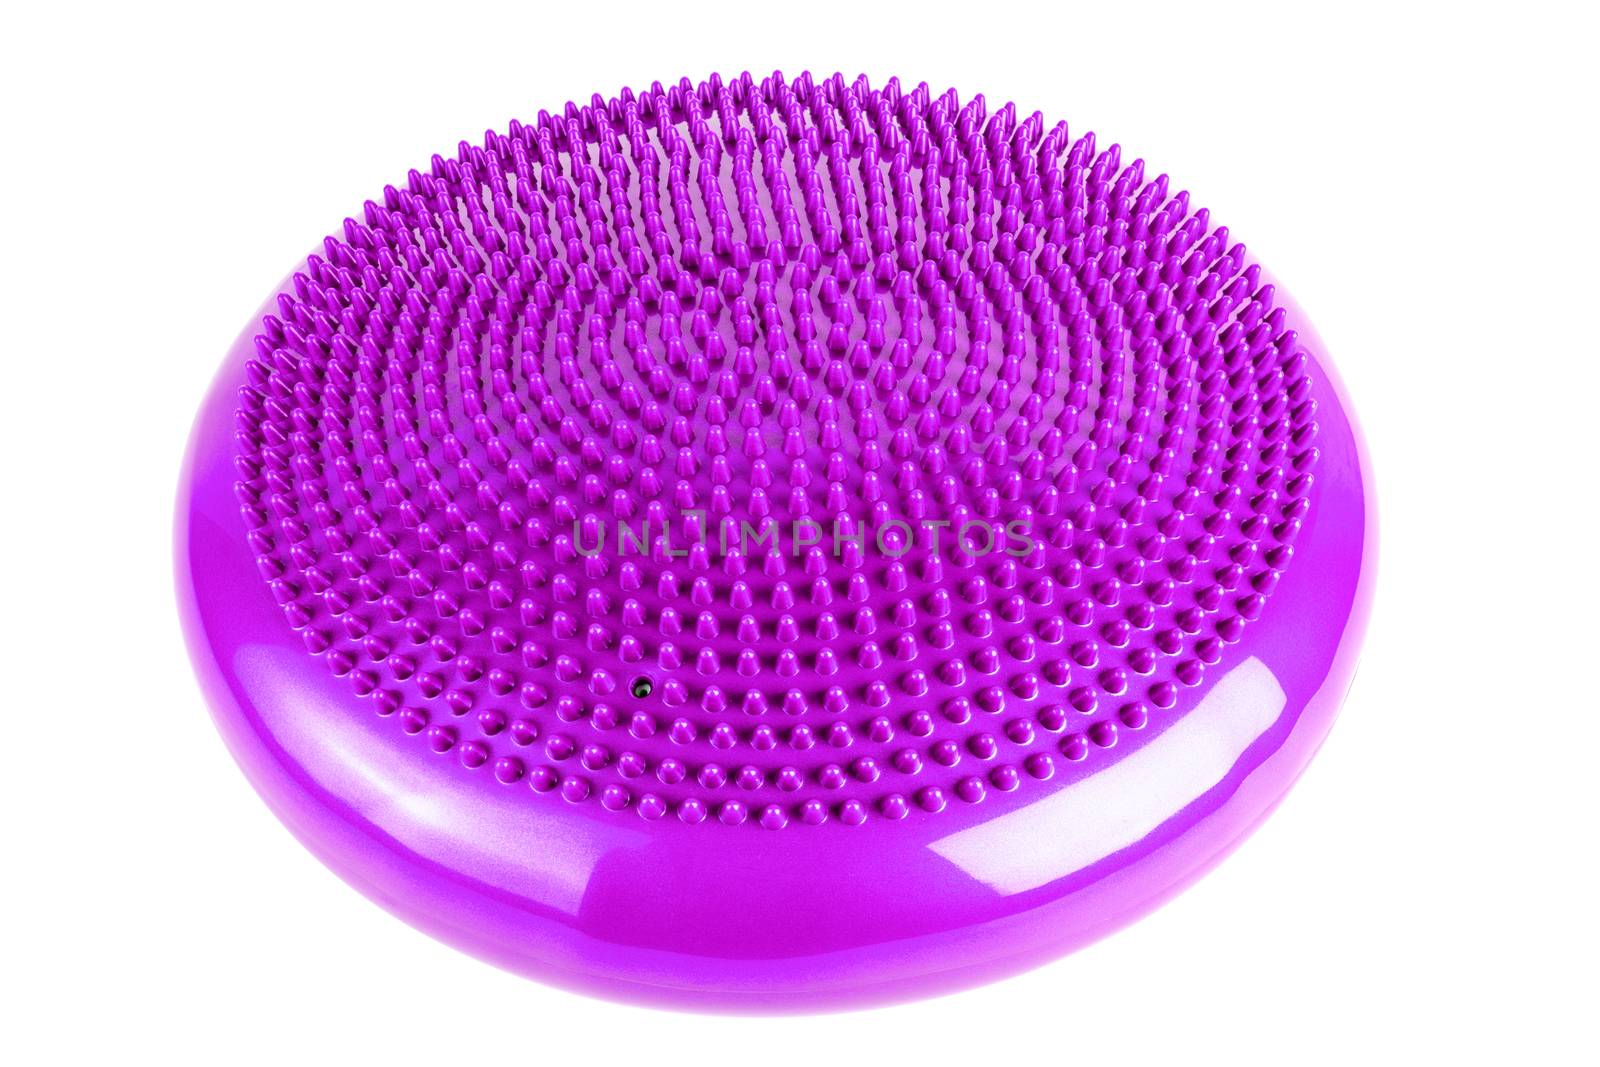 Purple inflatable balance disk isoleated on white background. A balance disk is a cushion can be used in fitness training as the base for core, balance, and stretching exercises. It is also known as a stability disc, wobble disc, and balance cushion.